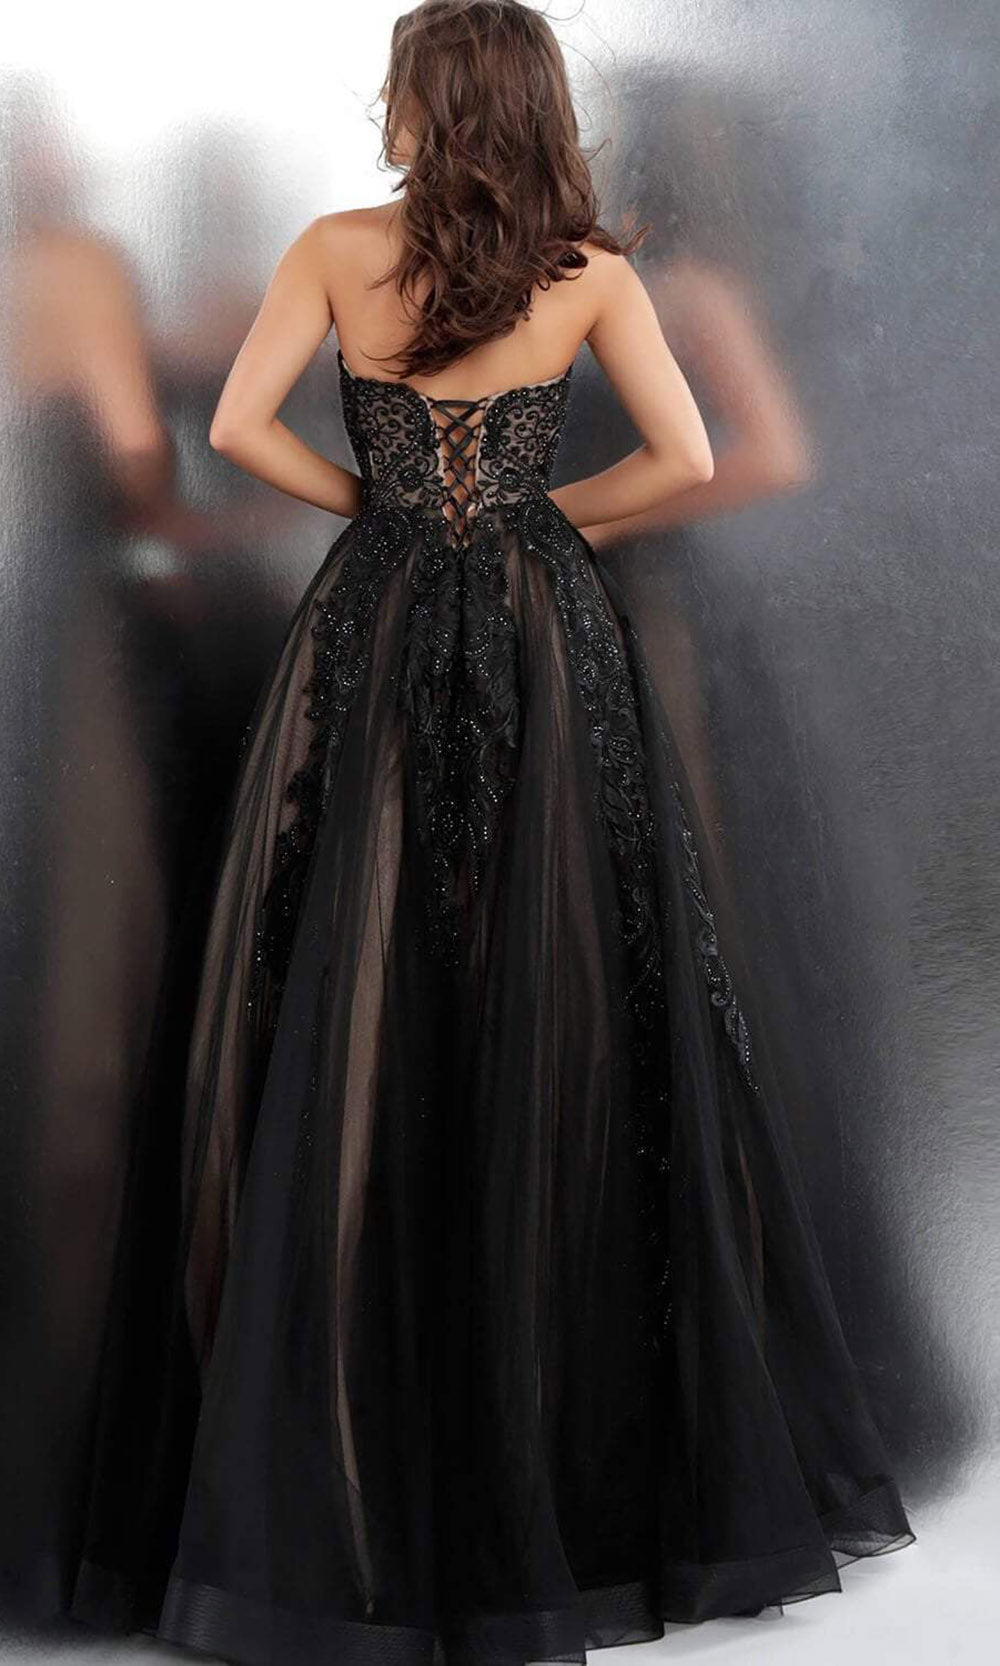 Jovani - Strapless Sweetheart Lace Ballgown JVN66970 - 1 pc Black/Nude In Size 14 Available CCSALE 0 / Black/Nude